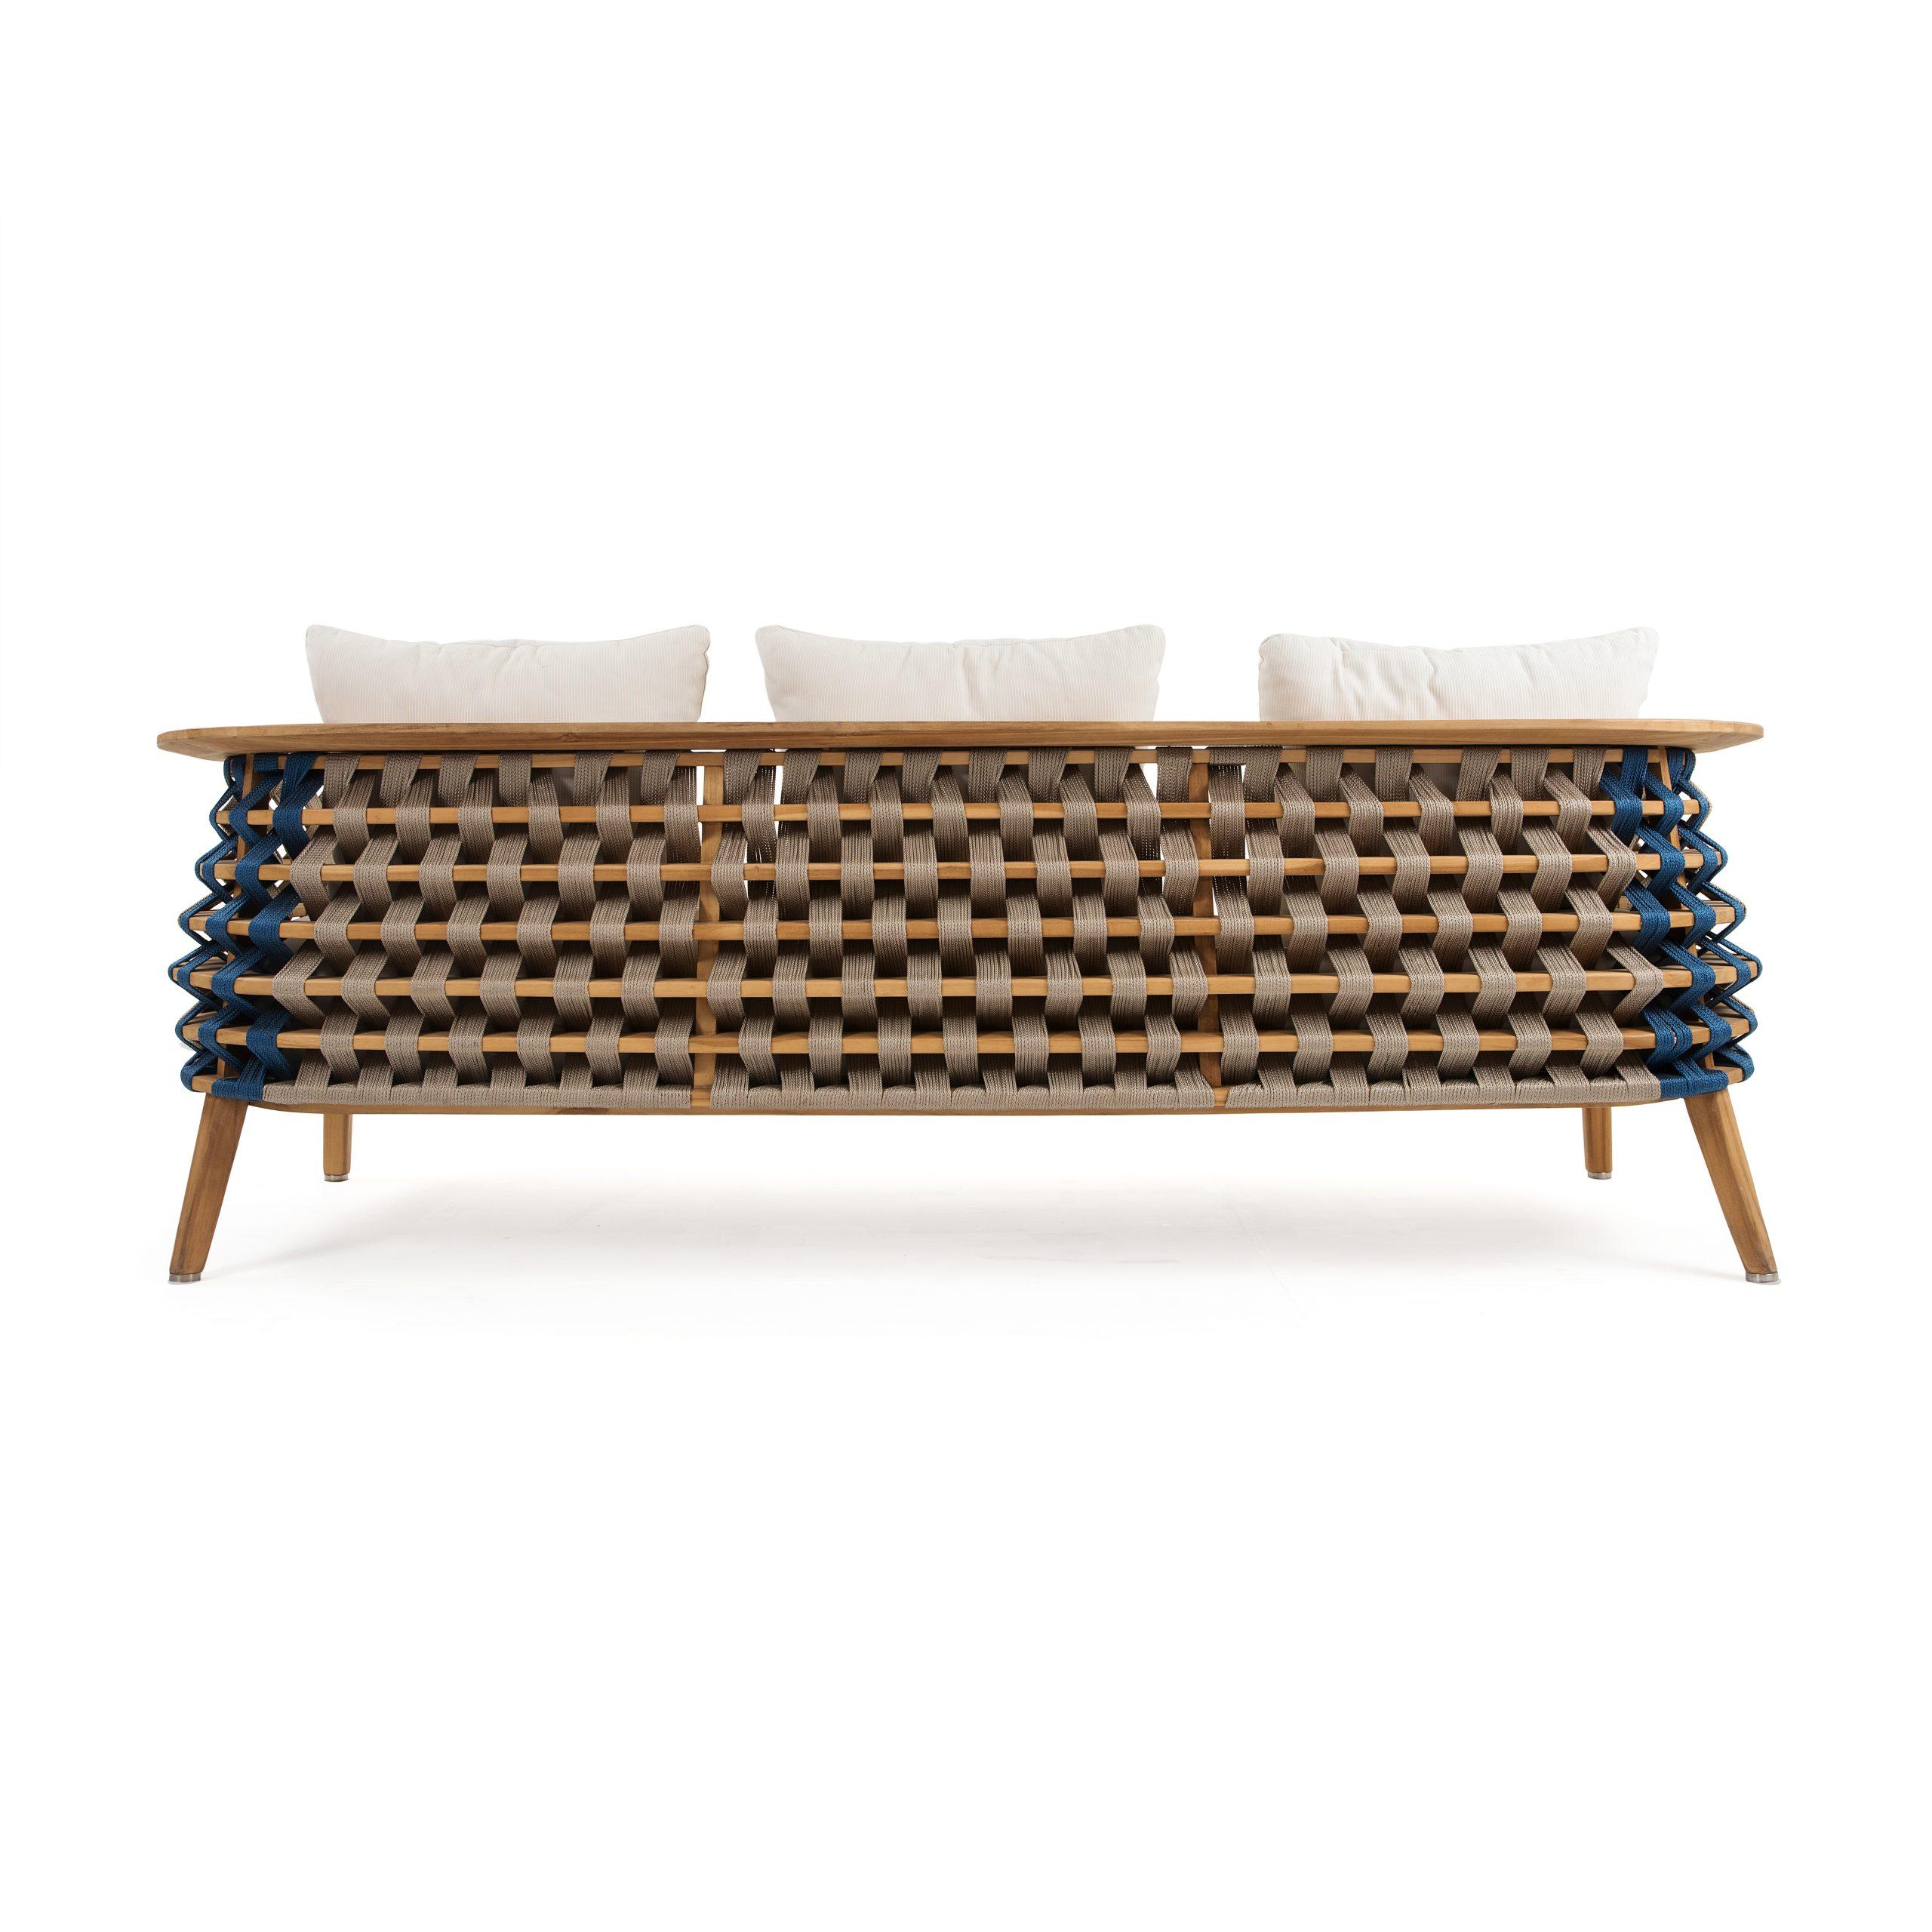 Structure: Teak wood – Aluminum: Antioxy, heavy load, anti-scratch easy clean.
Weaving: Flat 4mm. High Tenacity, Low shrinkage filament yarn made of 100% polyester, easy clean.
Fixed Upholstery with high quality quick dry foam.
The Material: Our